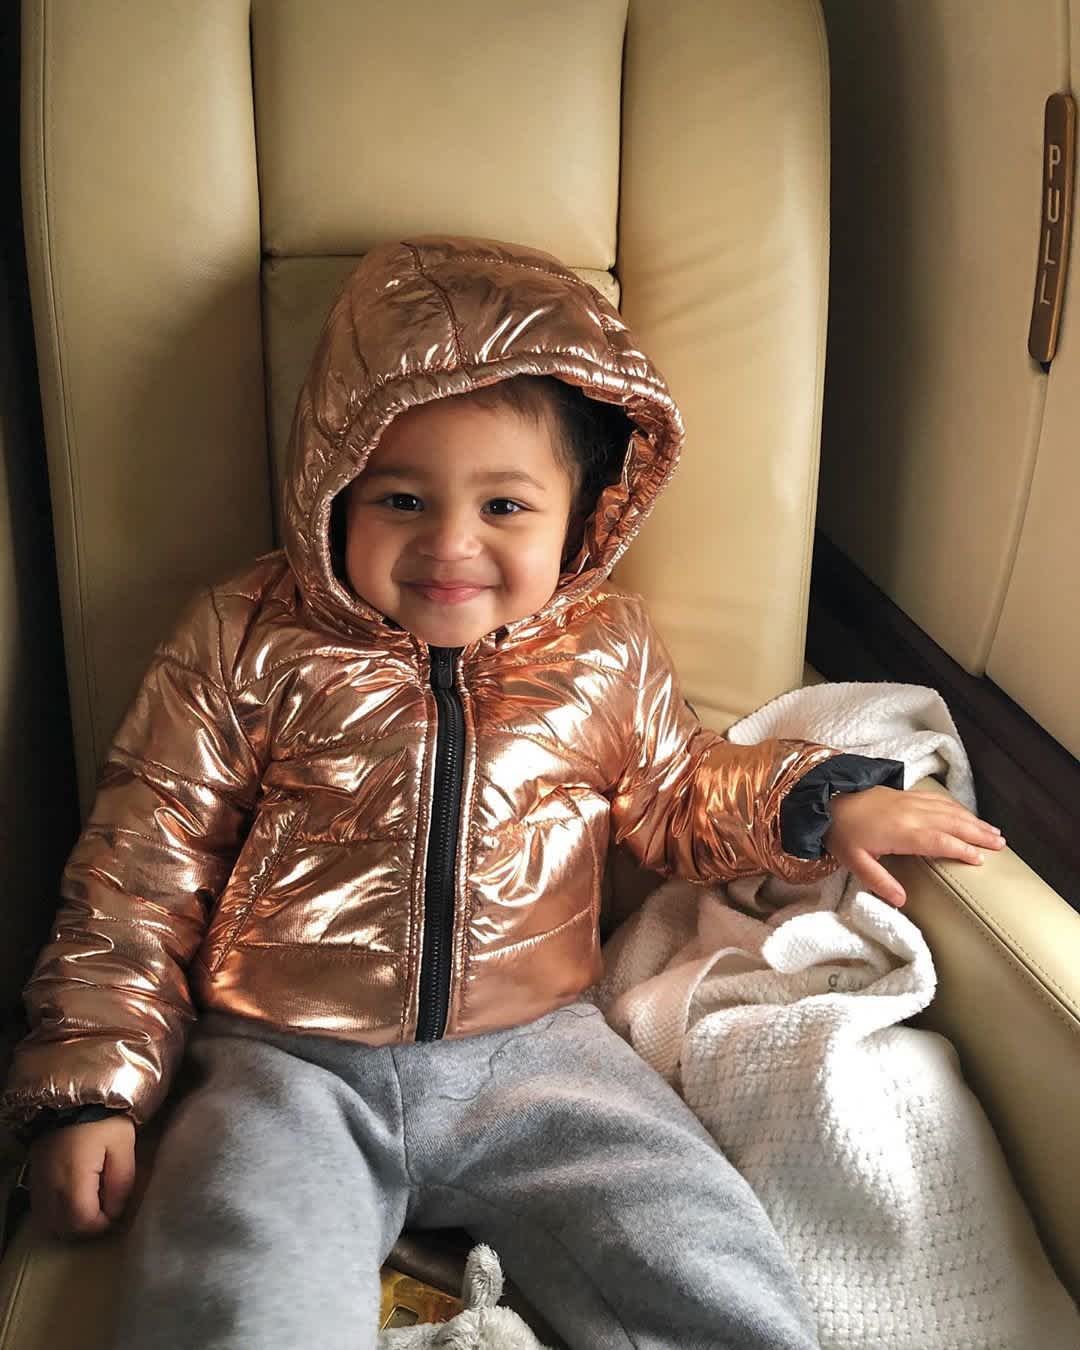 Stormi Webster Christmas Gifts - Kylie Jenner Just Got Stormi a